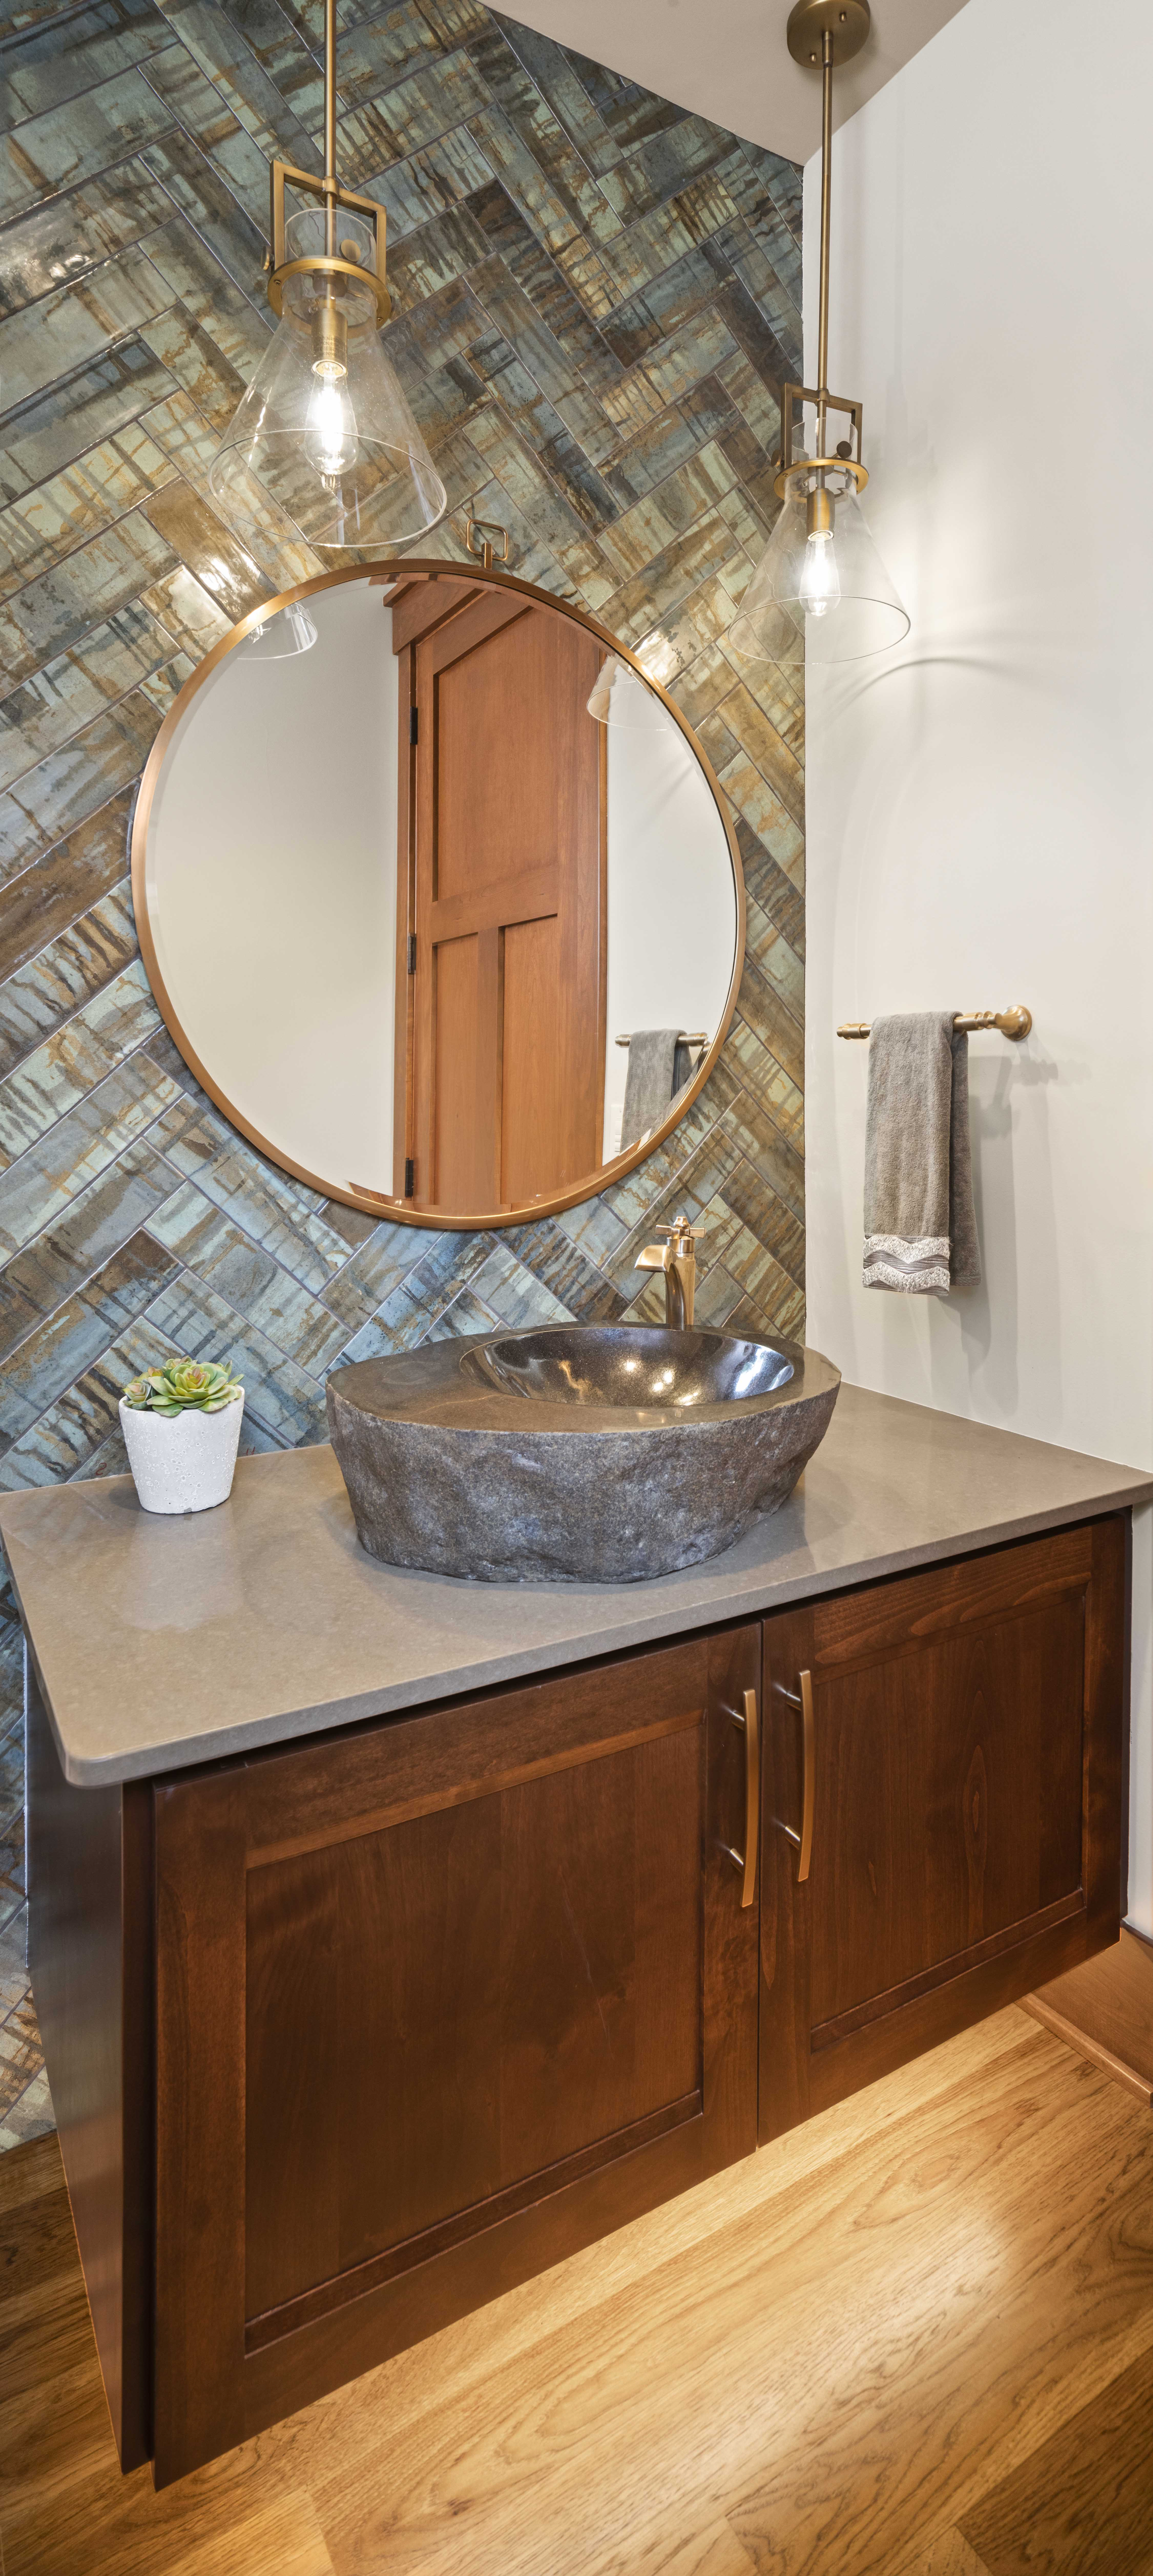 A custom home remodel featuring a bathroom with a stone sink and mirror.